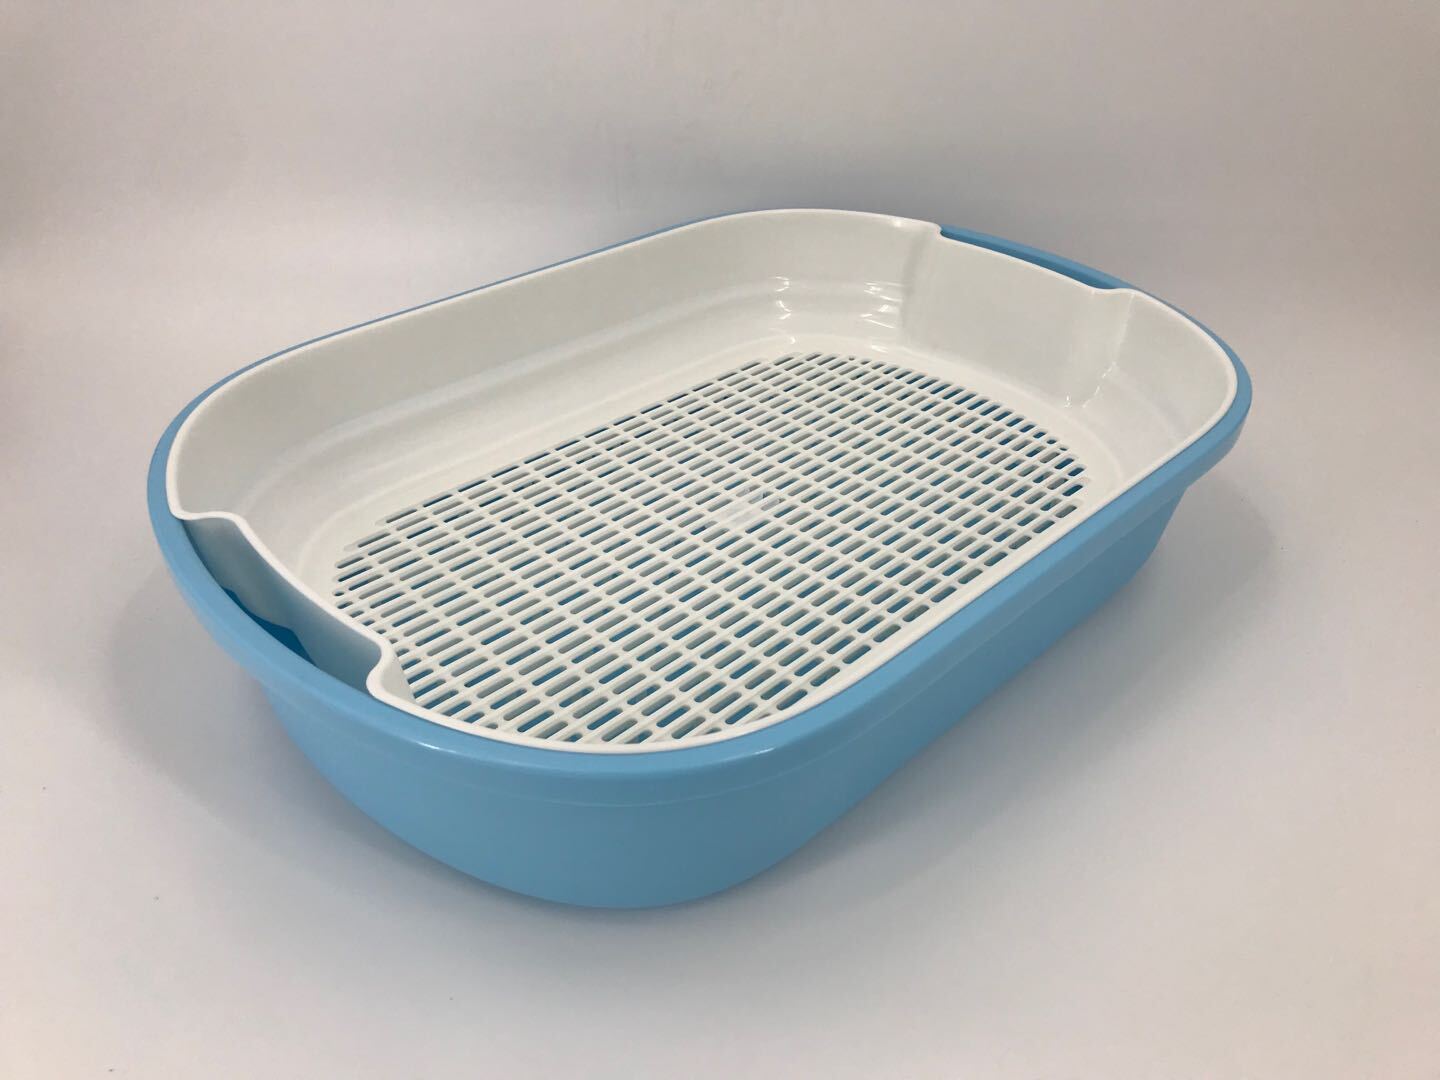 YES4PETS Large Portable Cat Toilet Litter Box Tray House with Scoop and Grid Tray Blue